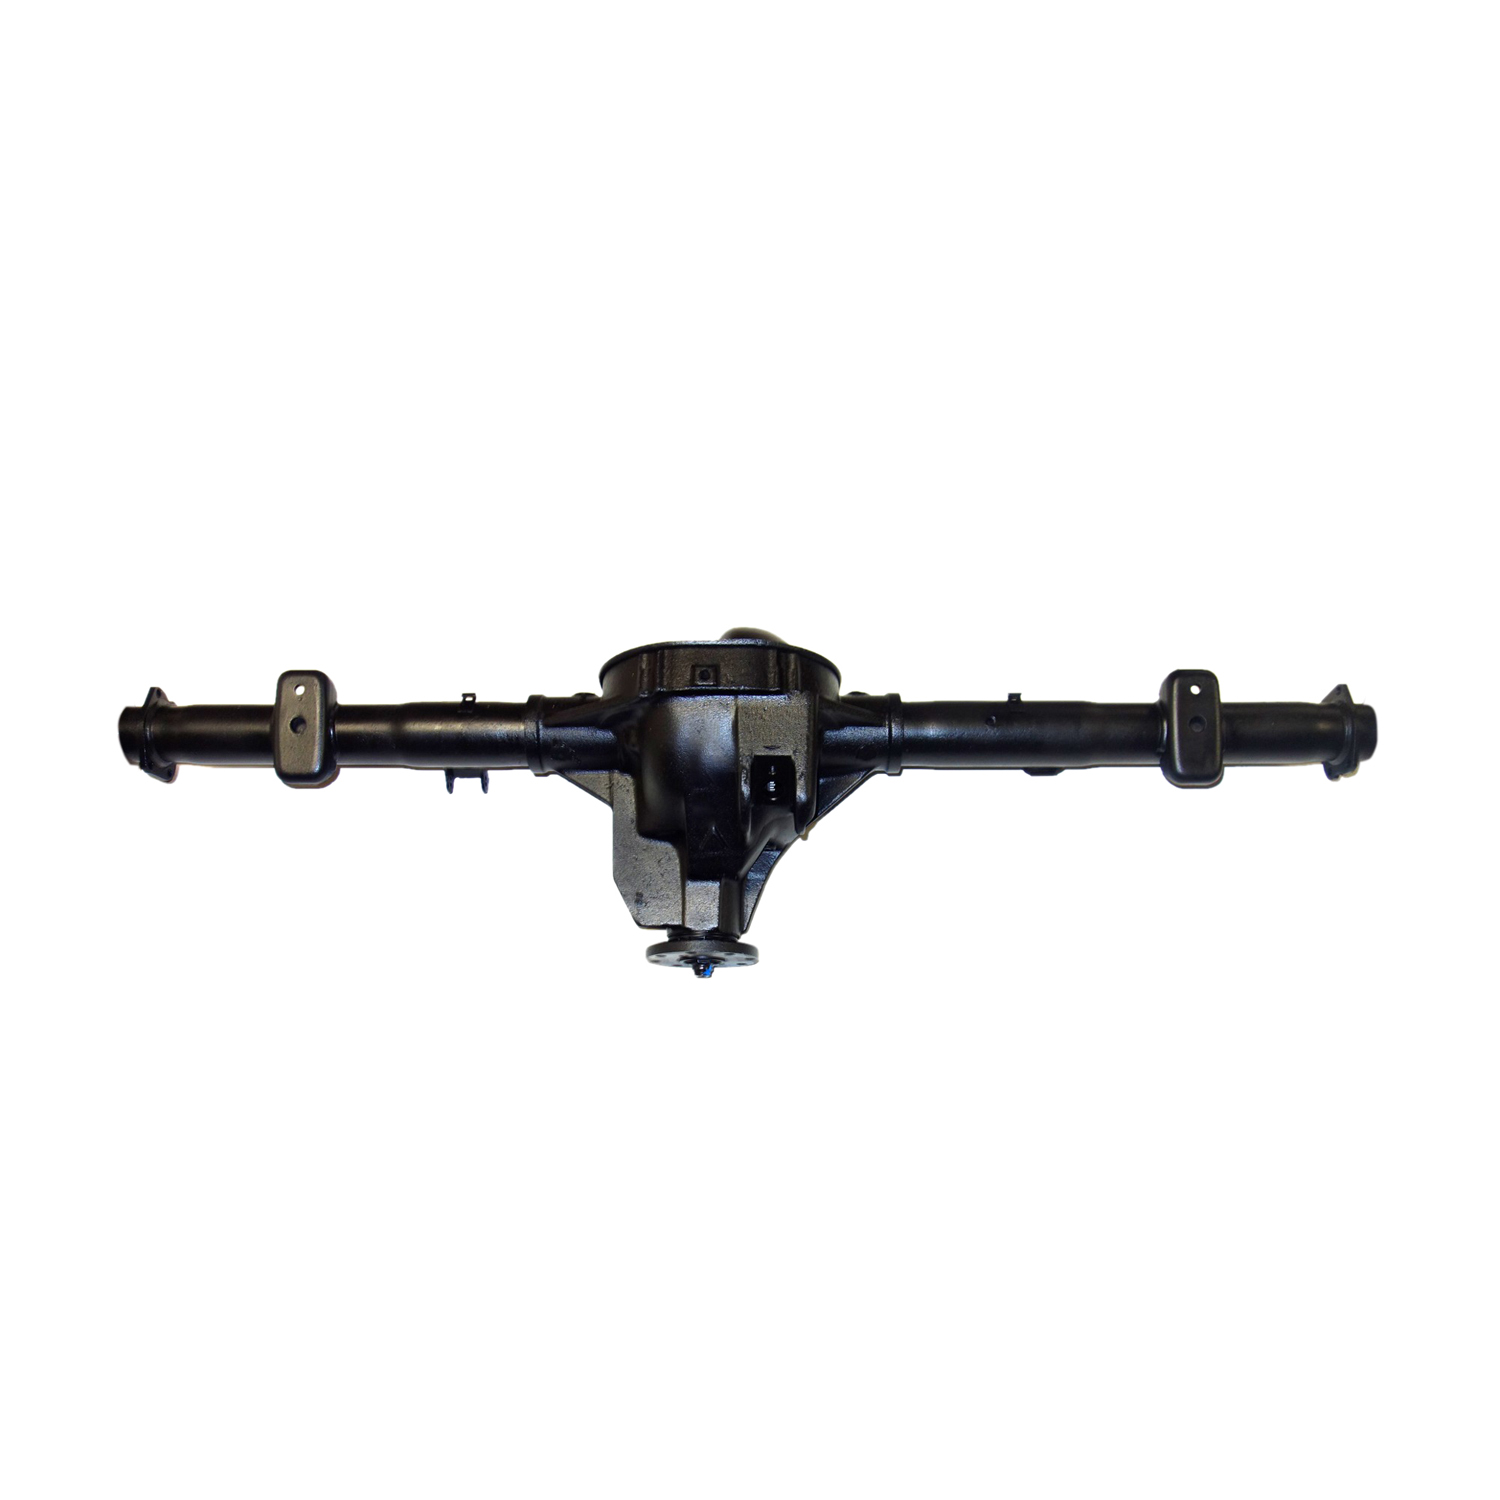 Reman Axle Assembly Ford 8.8" 94-97 Ford Ranger 4.11 Ratio, 10" Brakes